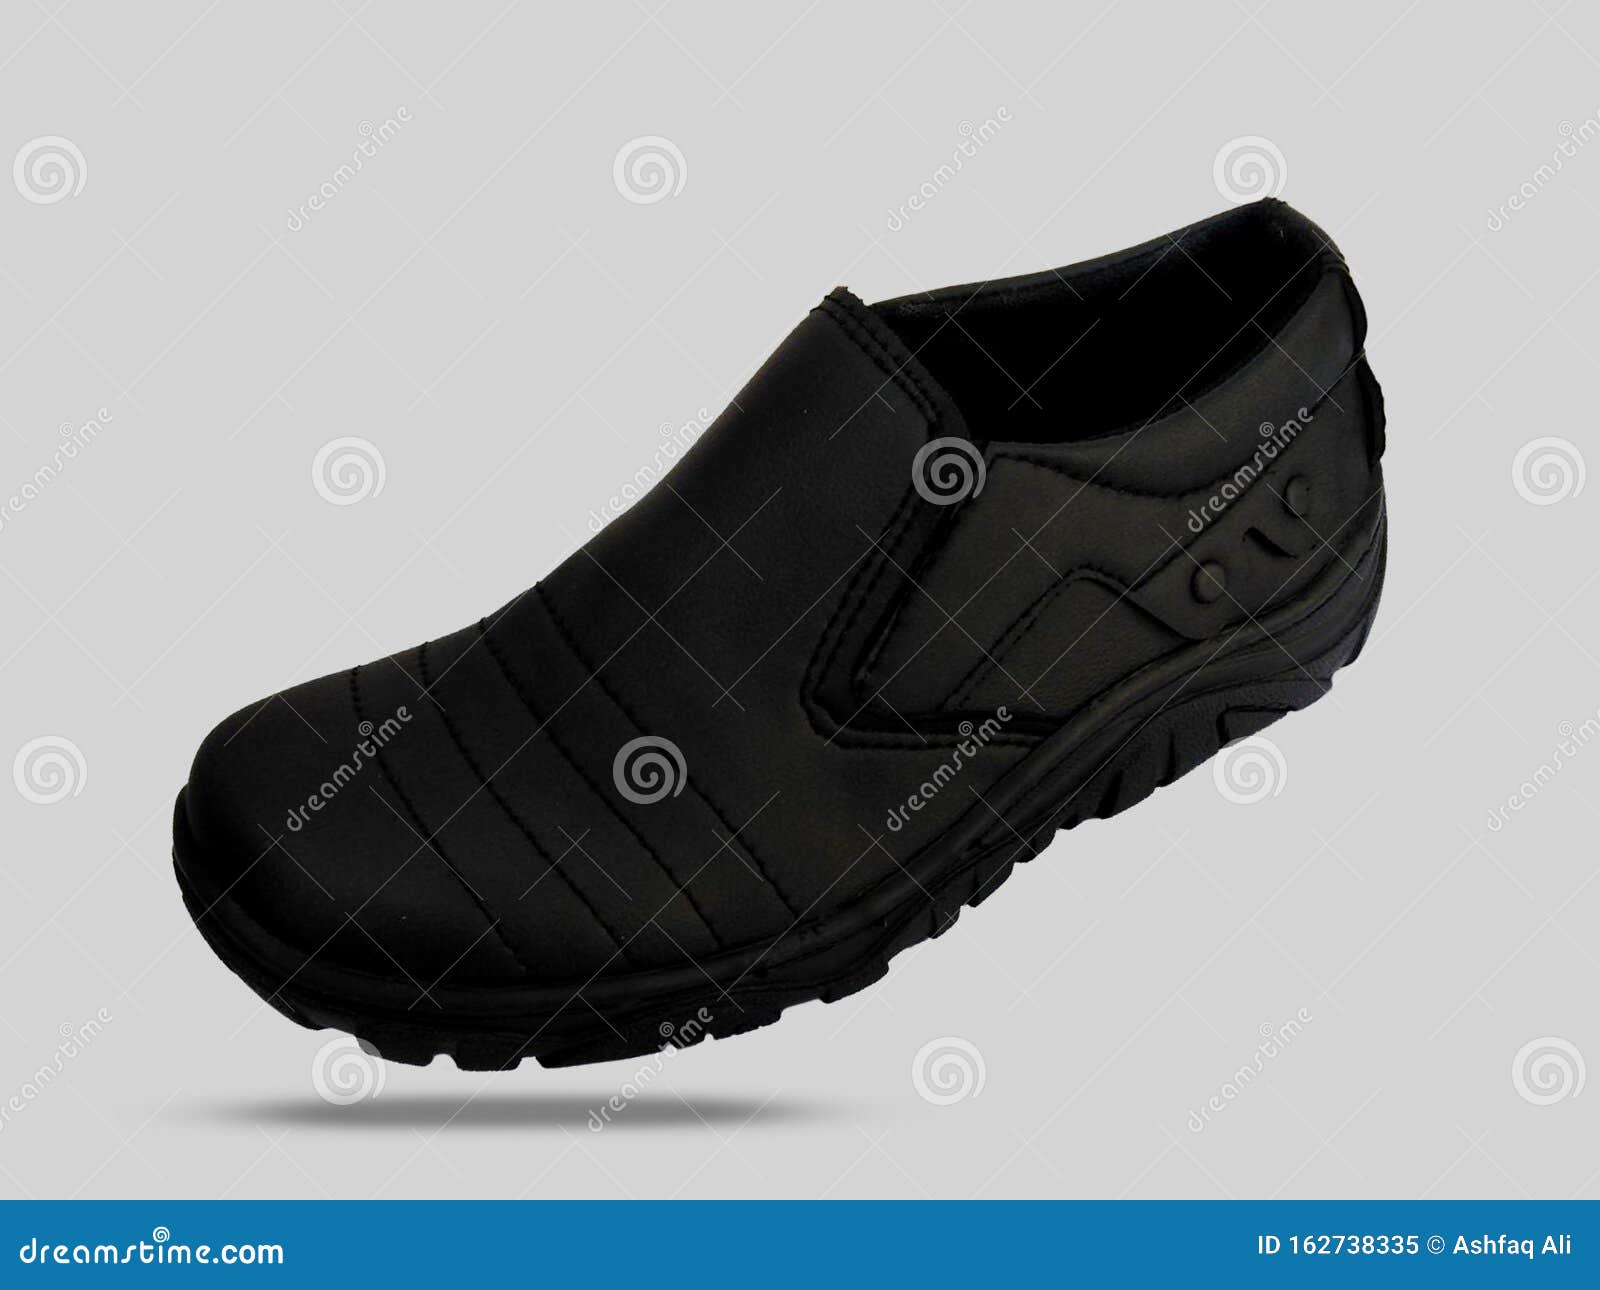 School Shoes, Stylish Shoes For Boys 